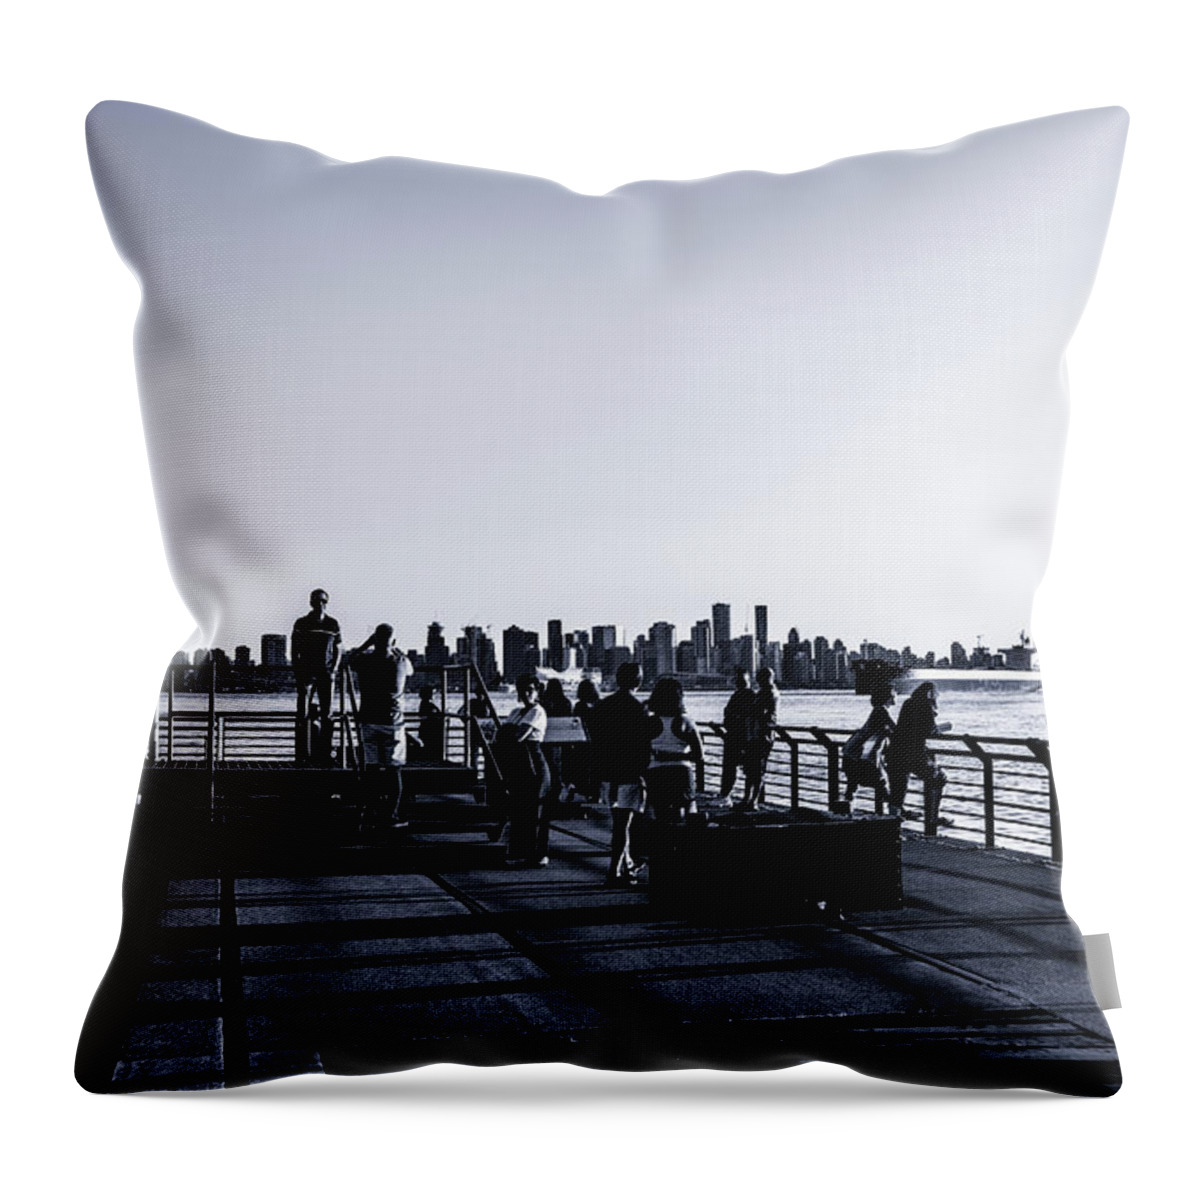 Winter Olympic City Throw Pillow featuring the photograph 0112 Burrard Dry Dock Pier North Vancouver by Amyn Nasser Neptune Gallery